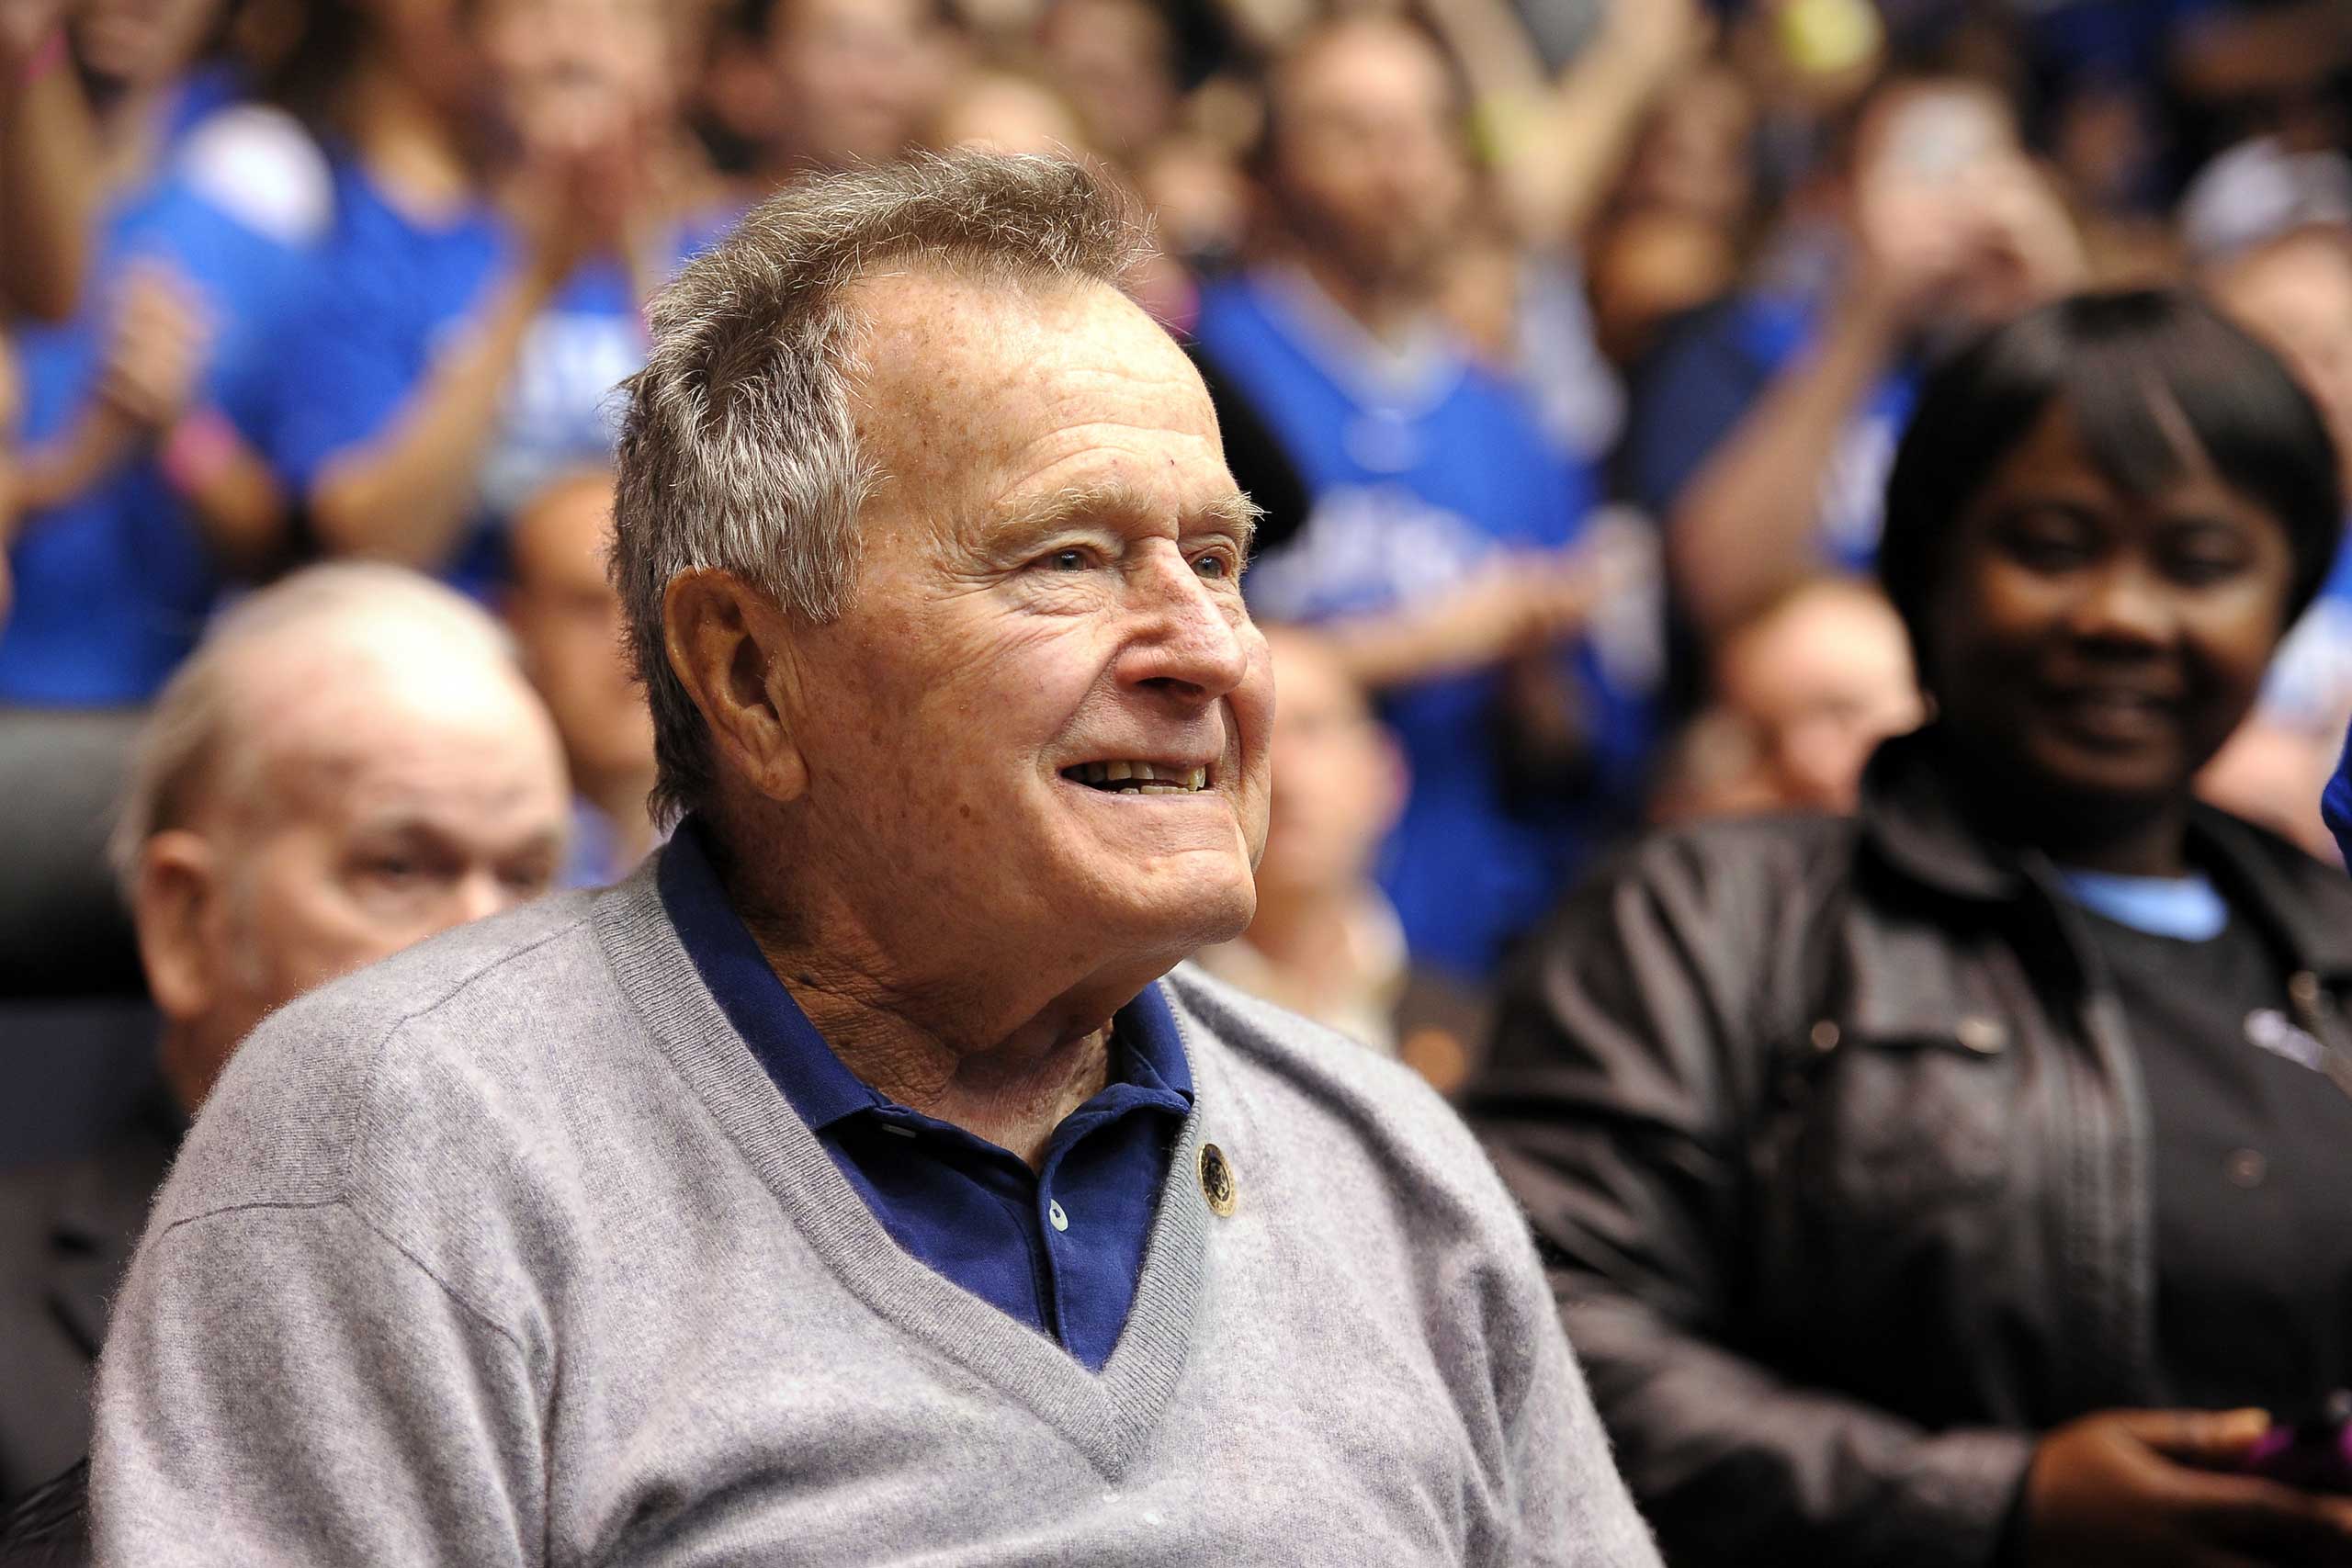 Former U.S. President George H.W. Bush looks on during a game between the North Carolina State Wolfpack and the Duke Blue Devils at Cameron Indoor Stadium in Durham, N.C., on Jan. 18, 2014 (Lance King—Getty Images)